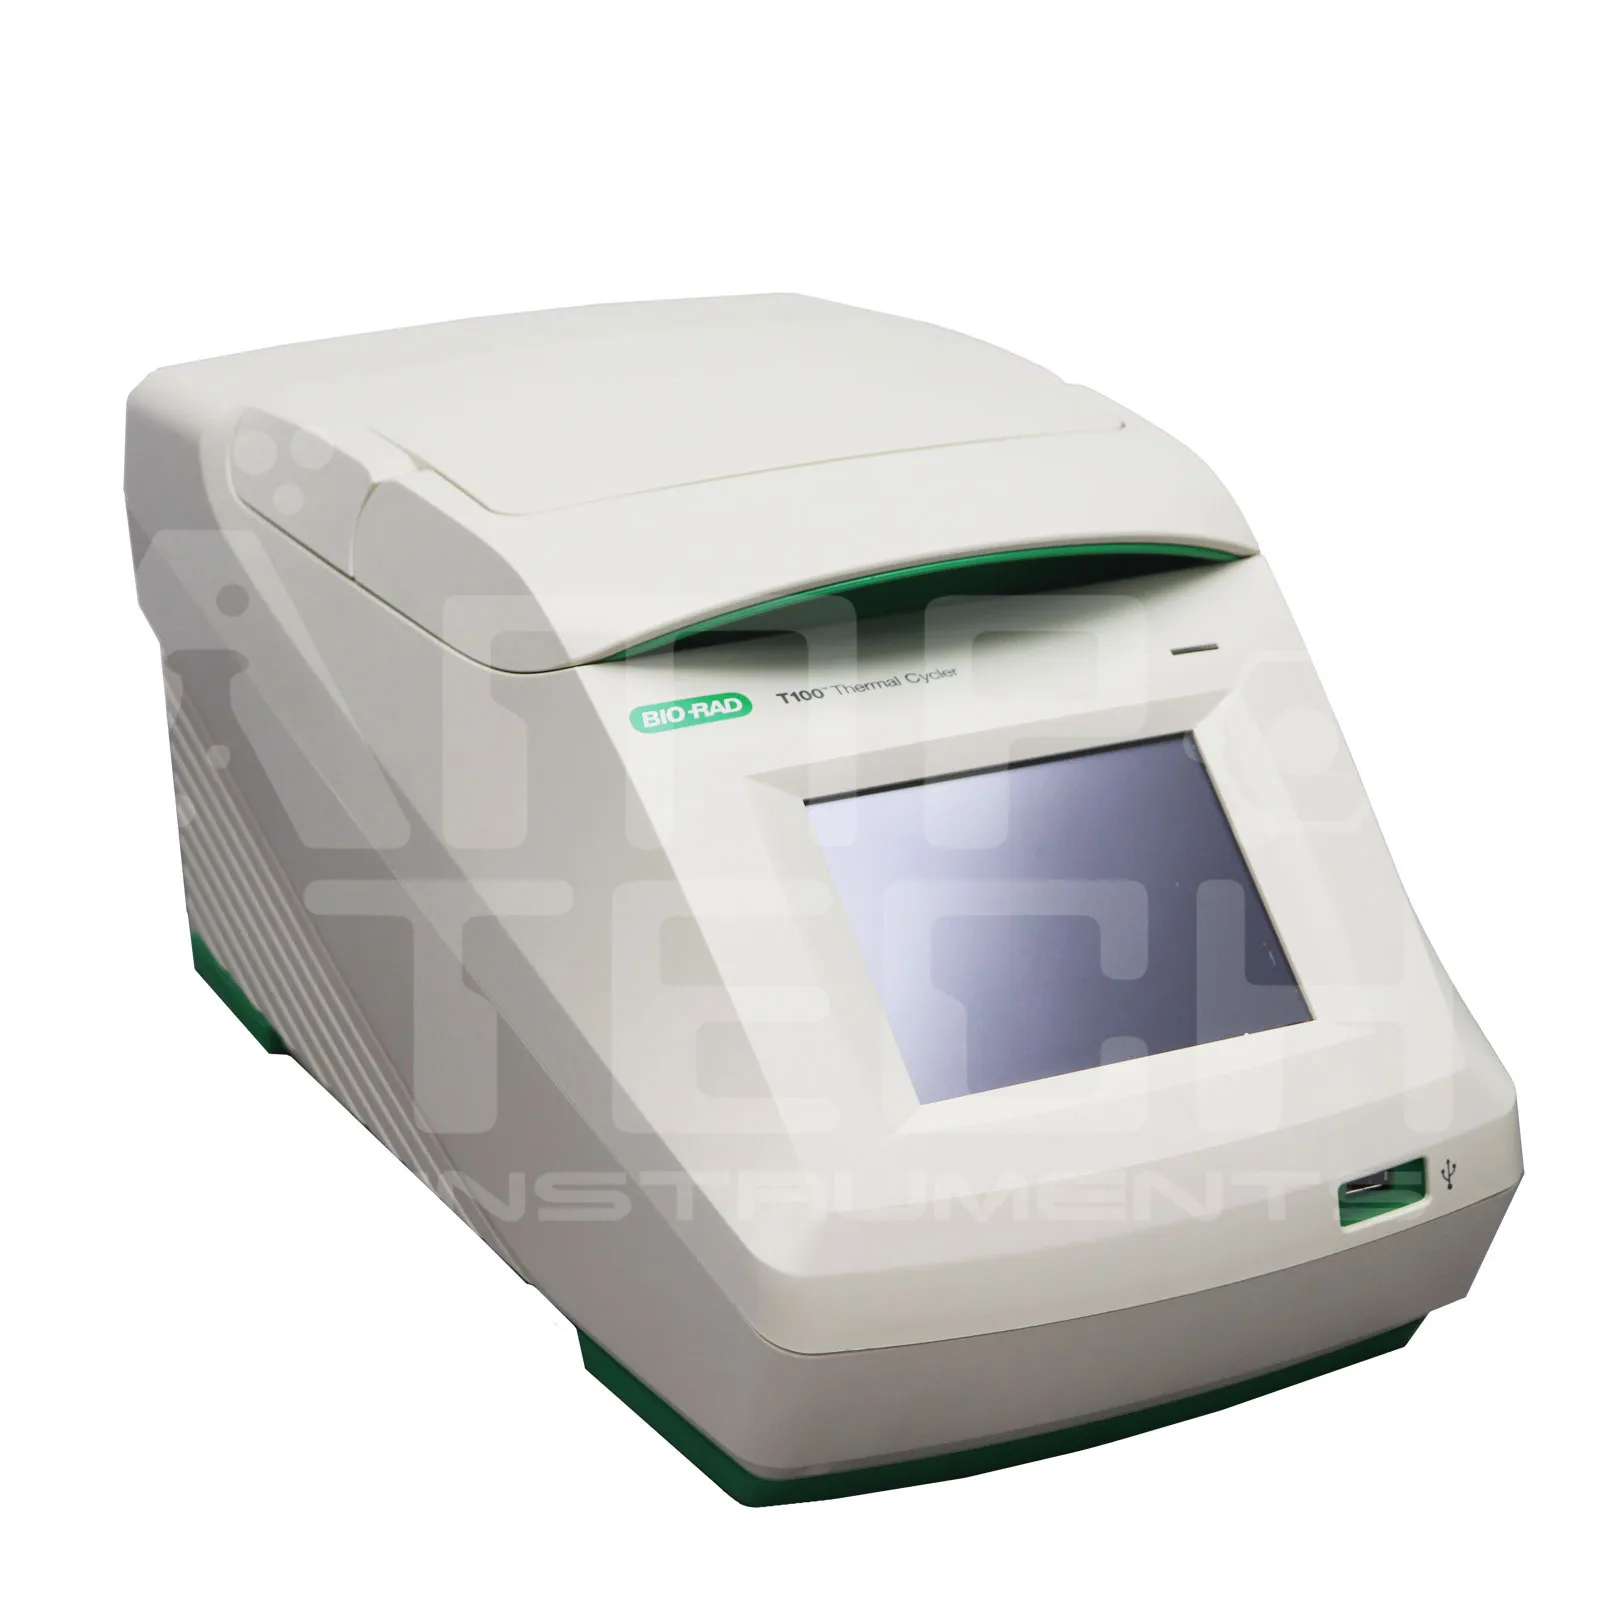 Bio-Rad T100 96-Well Digital Touch Screen Thermal Cycler